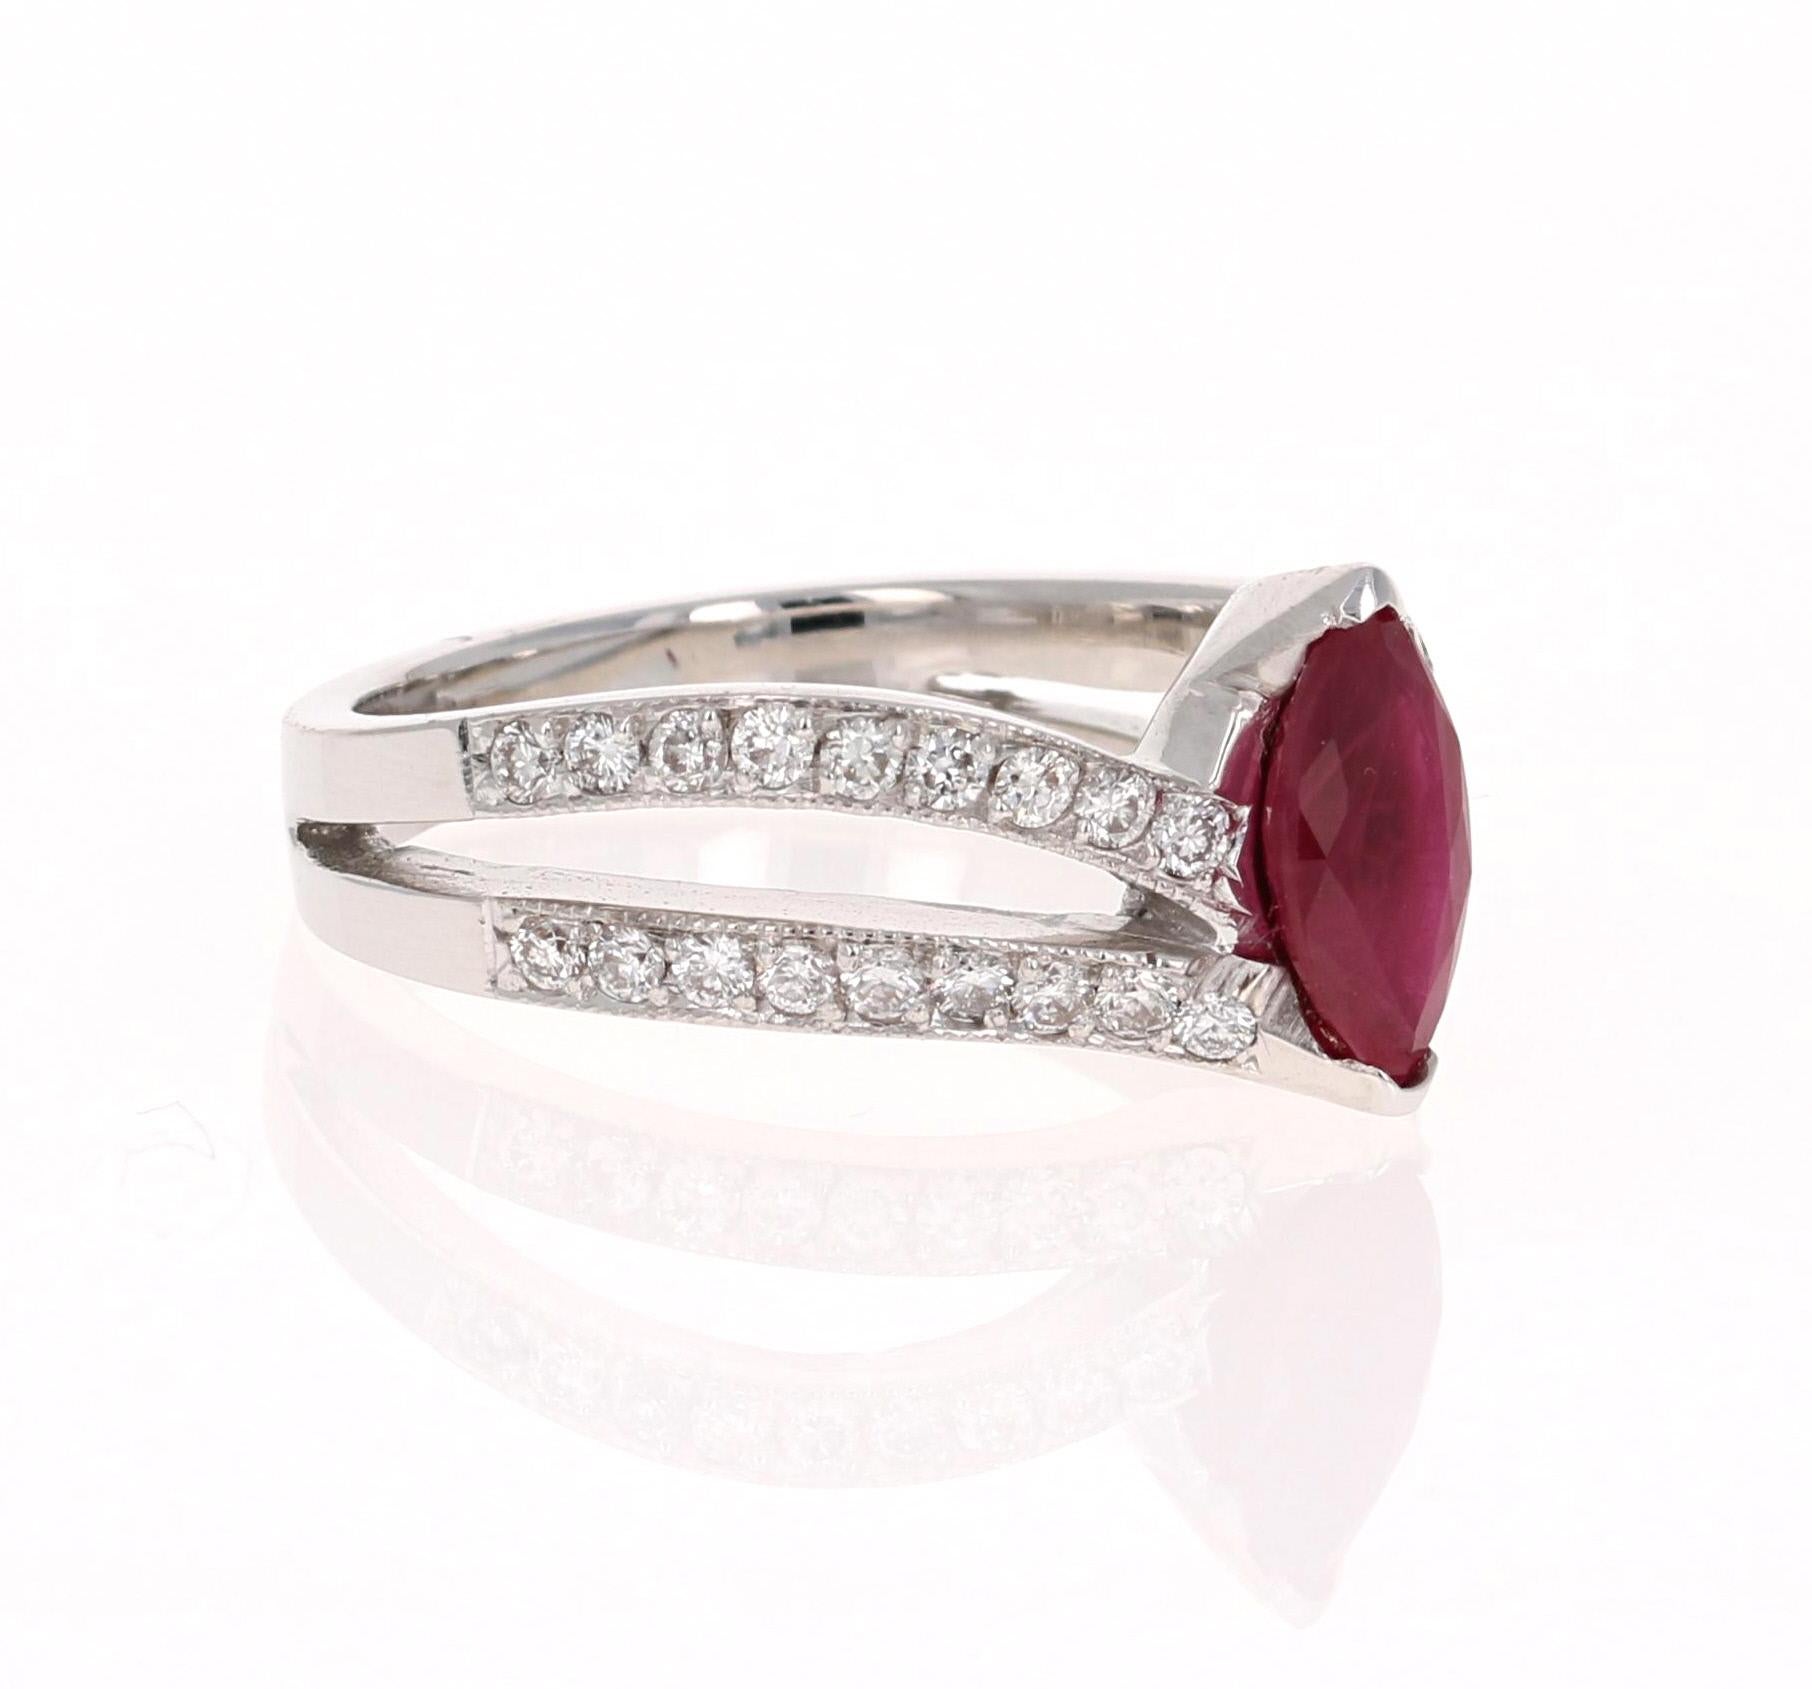 
There is a beautiful Marquise cut Mozambique Ruby set in the center of the ring that weighs 0.93 carats and there are 36 Round Cut Diamonds that weigh 0.54 carats (Clarity: VS2, Color: F).  The total carat weight of the ring is 1.48 carats.  This